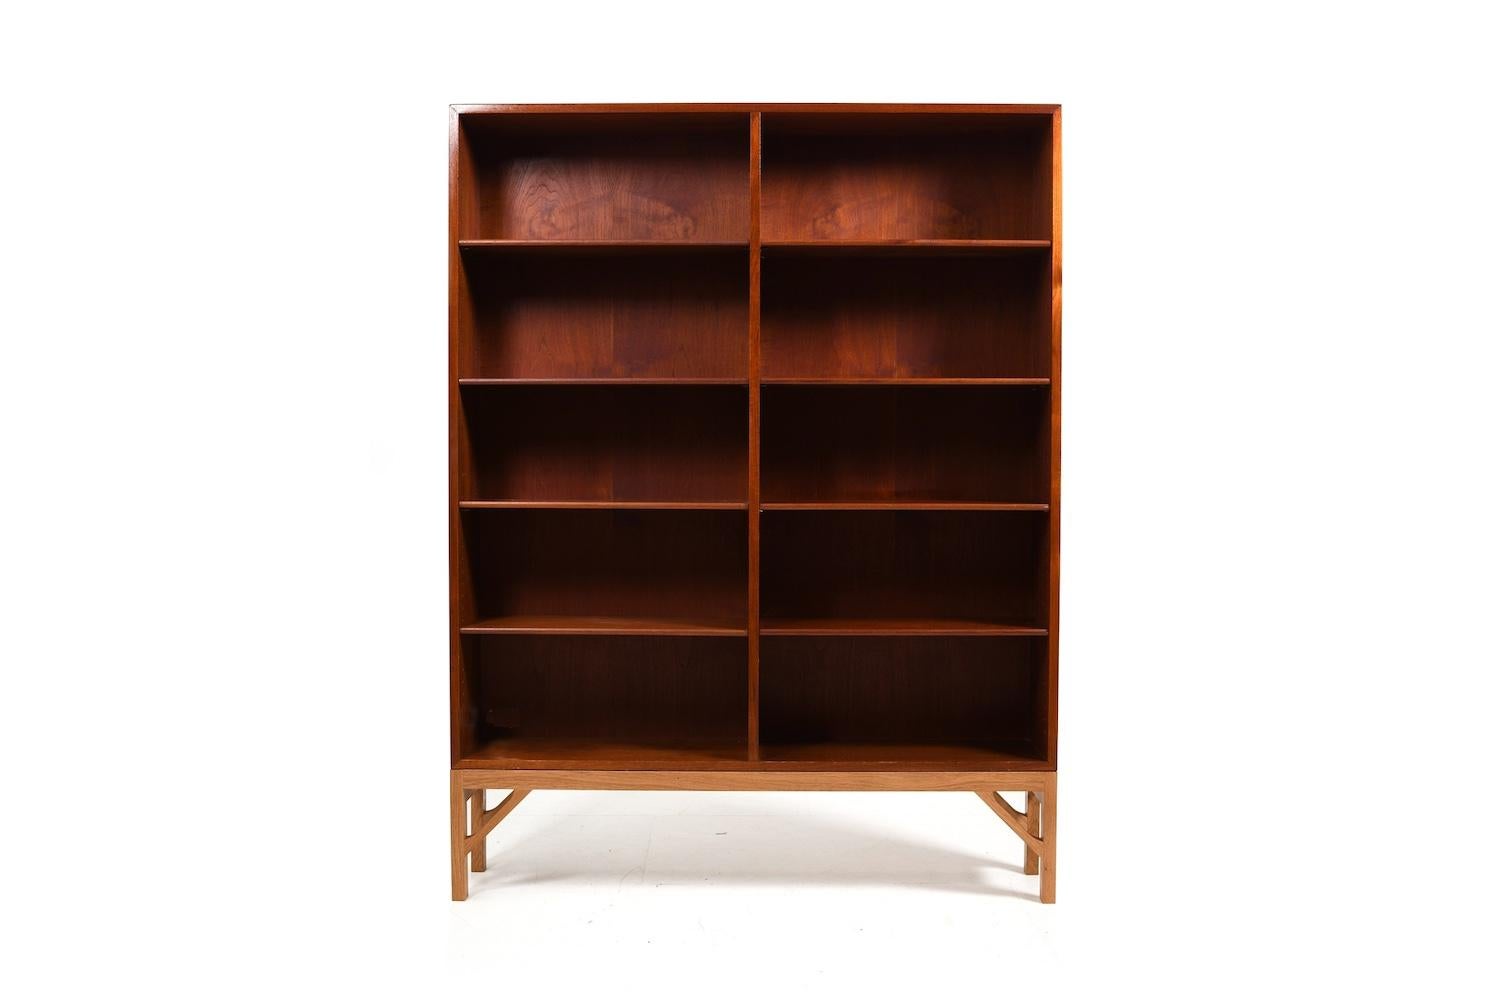 Book case,  model no.152 by Børge Mogensen for FDB Møbler. Teak shelve on solid oak base. He designed his China Series in 1960s. Produced i1960s. A not so nice hole for cables etc. in the back wall was closed by us / glued over with a piece of back